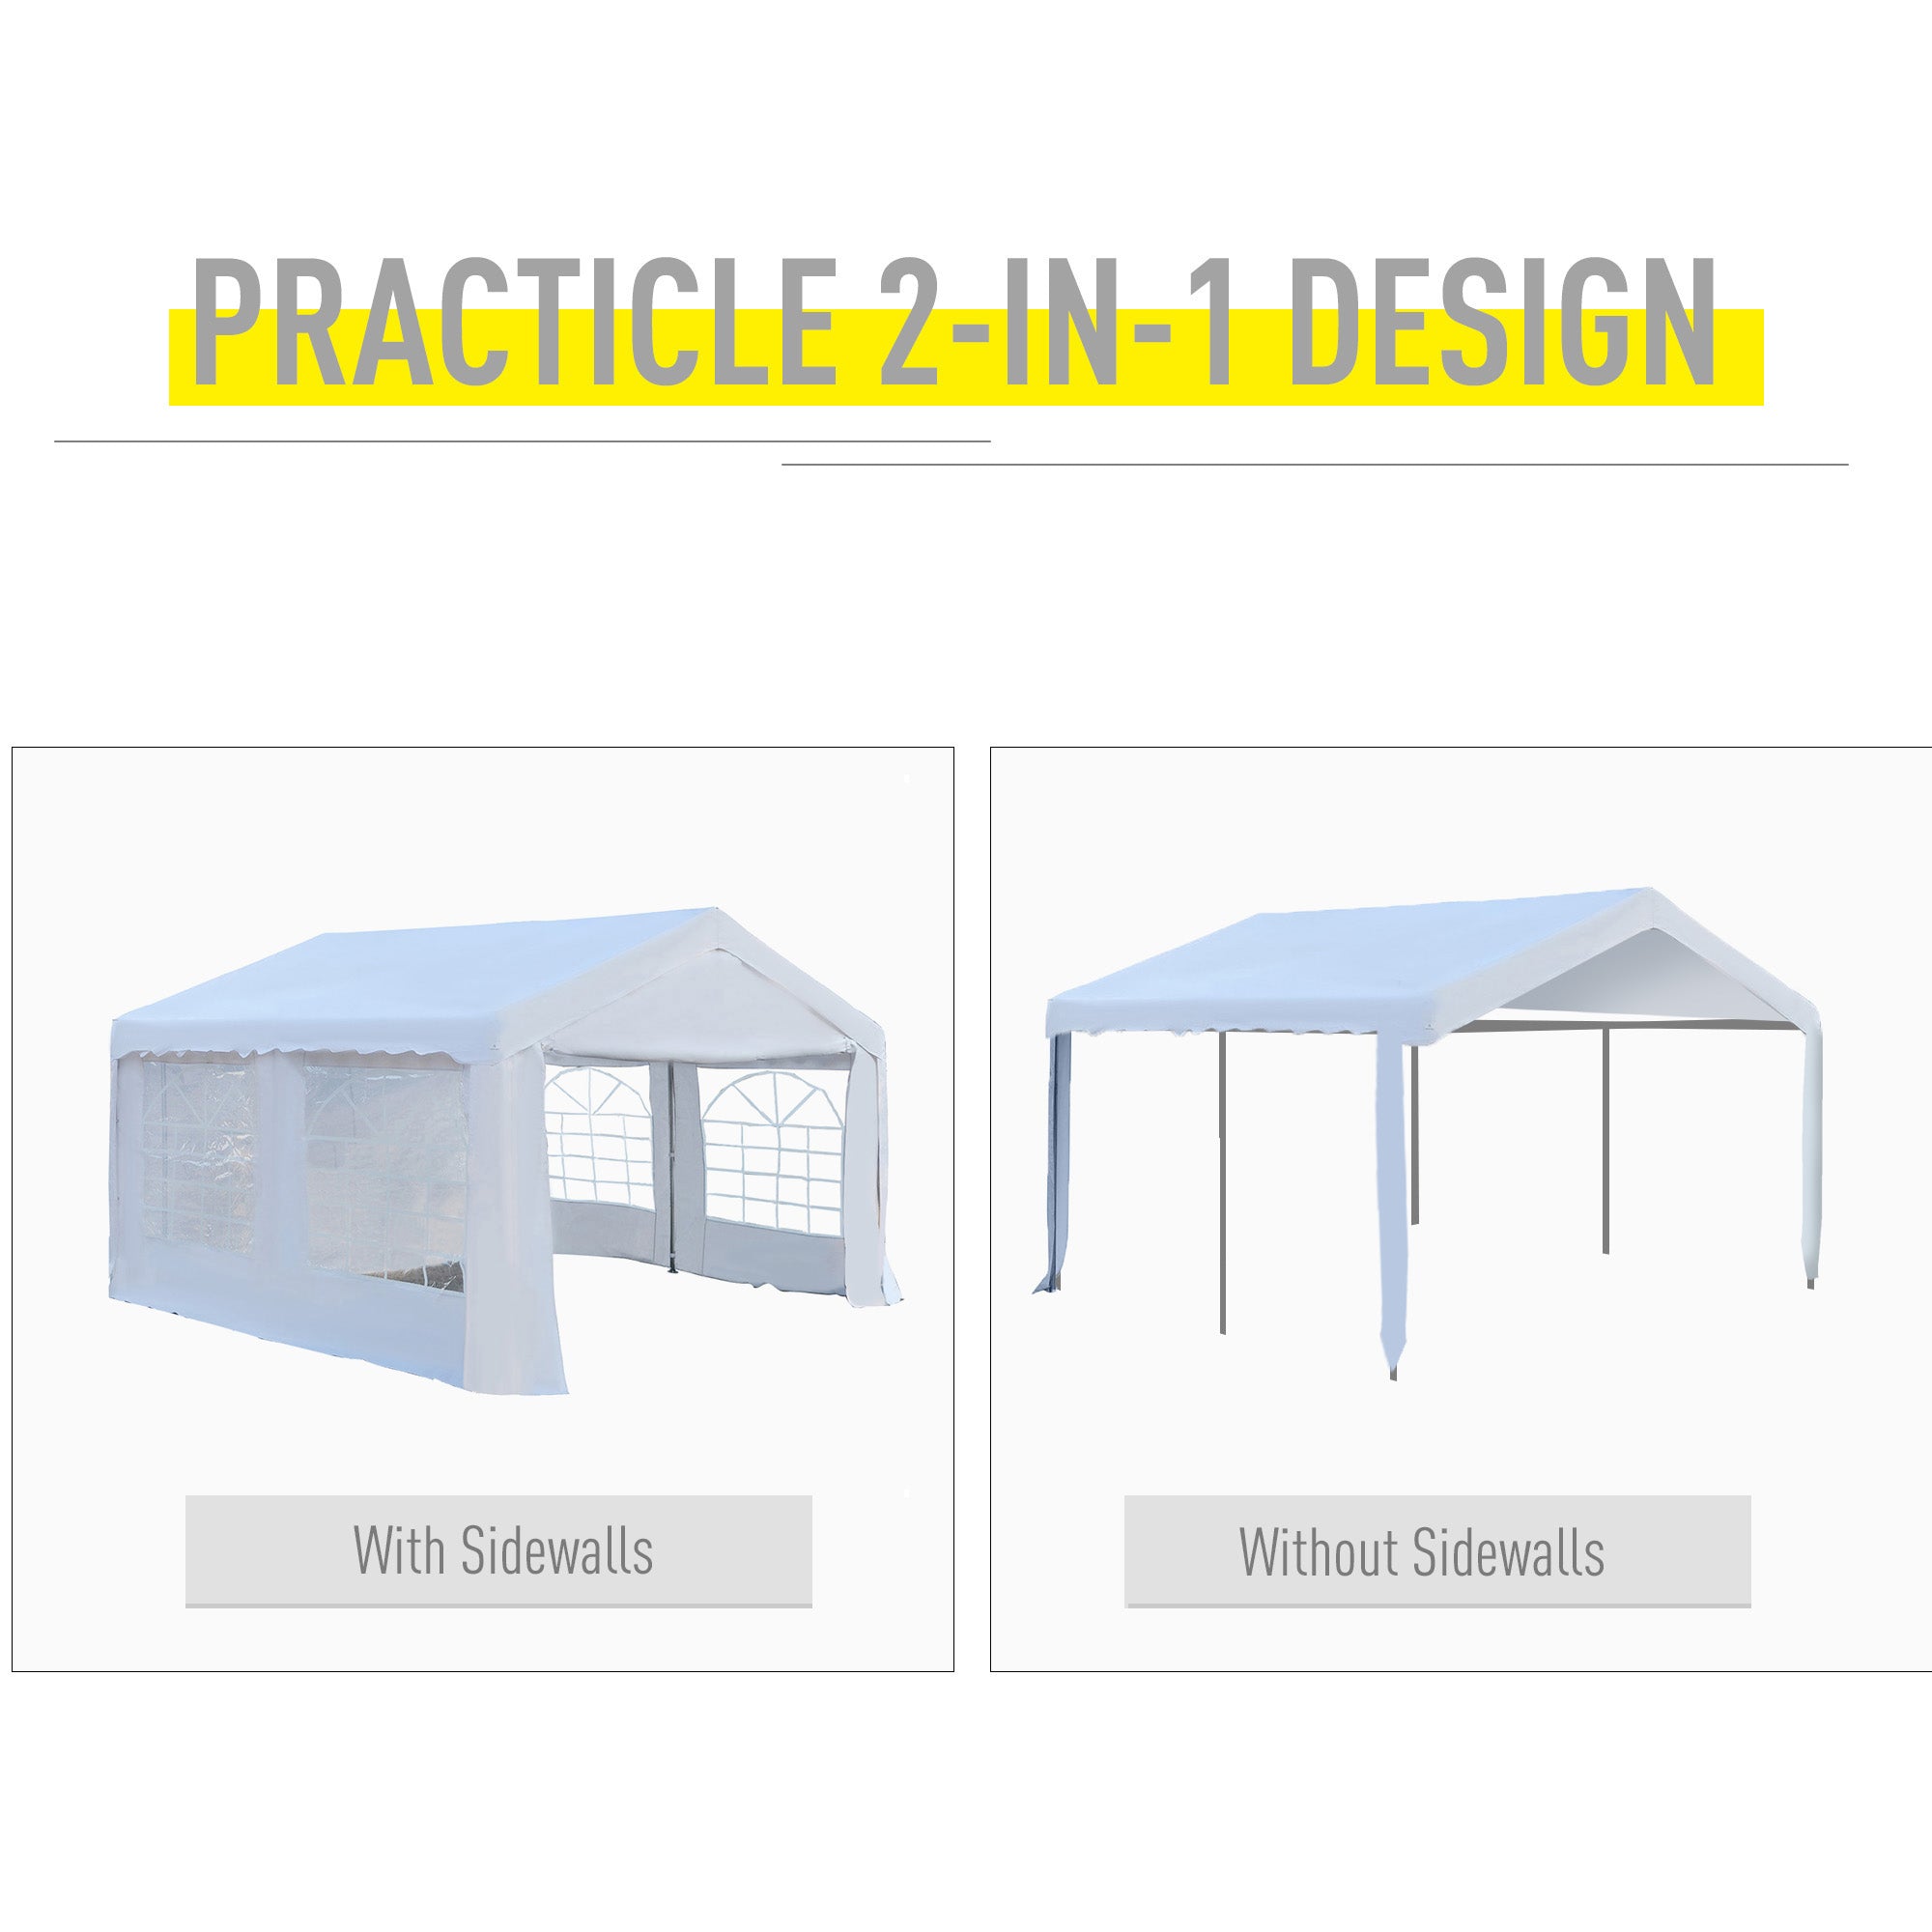 4m x 4 m Party Tents Portable Carport Shelter with Removable Sidewalls & Double Doors, Heavy Duty Party Tent Car Canopy-3